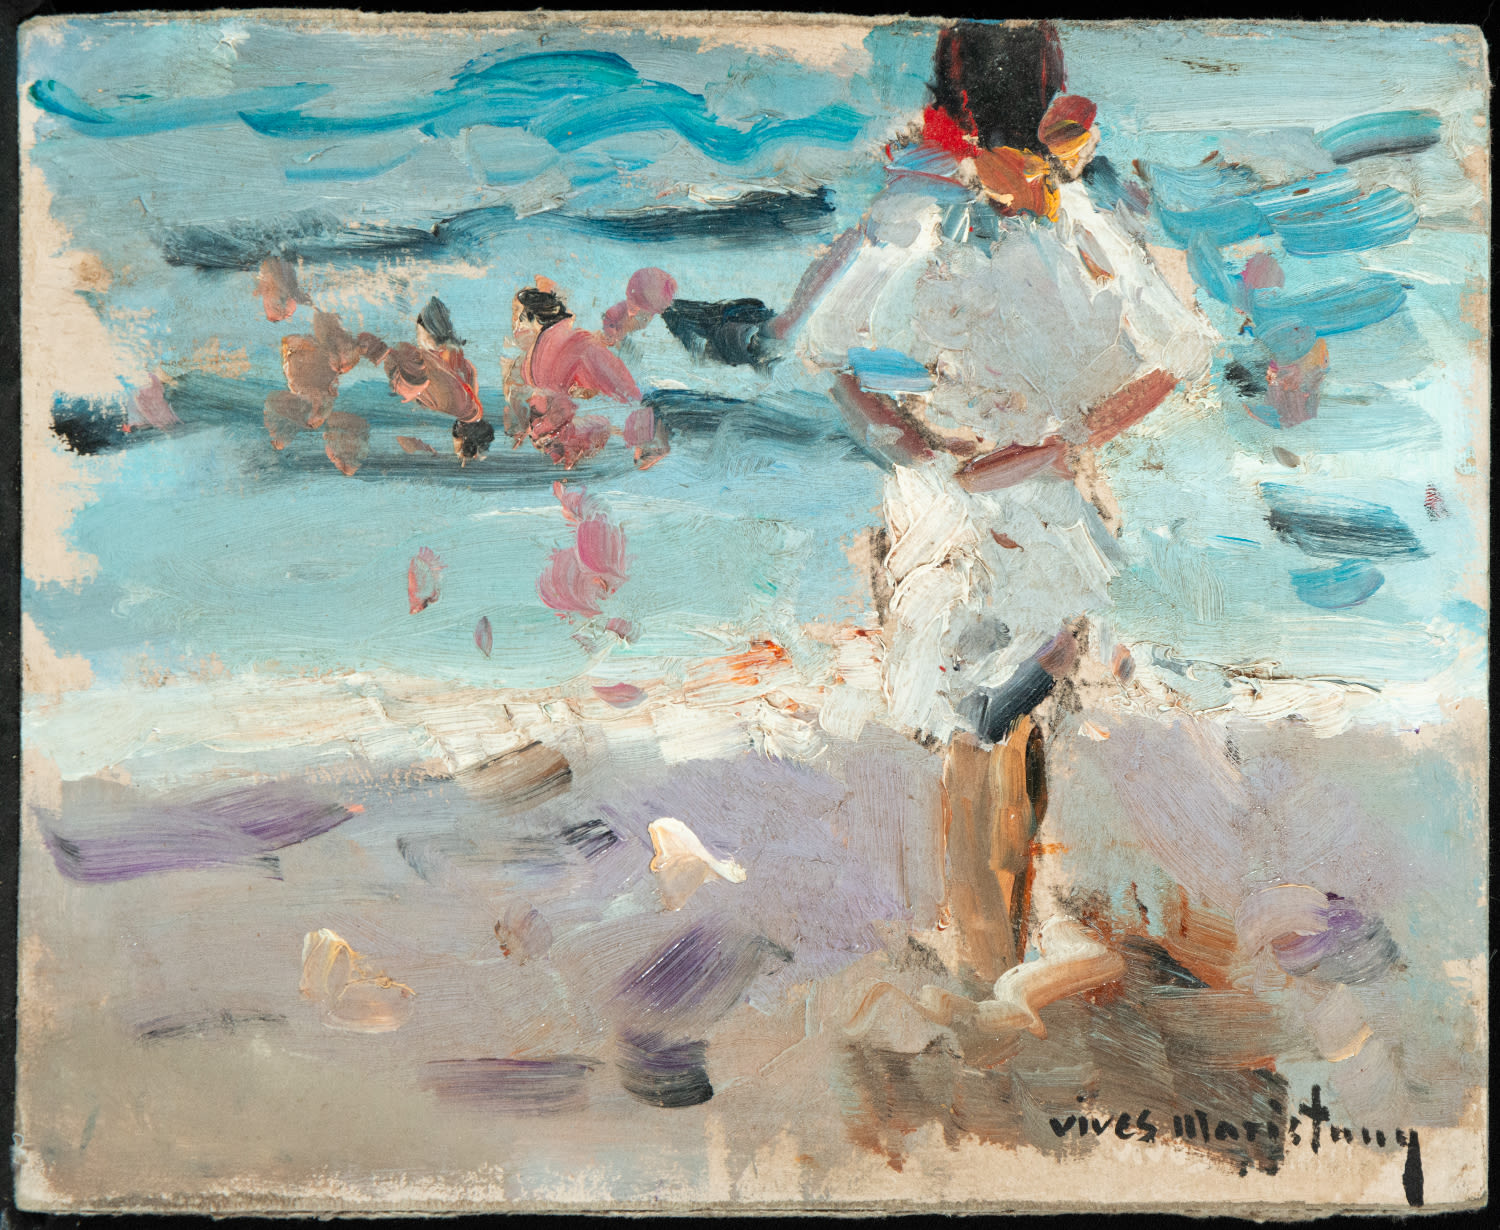 Sketch of characters on the beach on cardboard, signed Vives Maristany, 19th century Catalan school